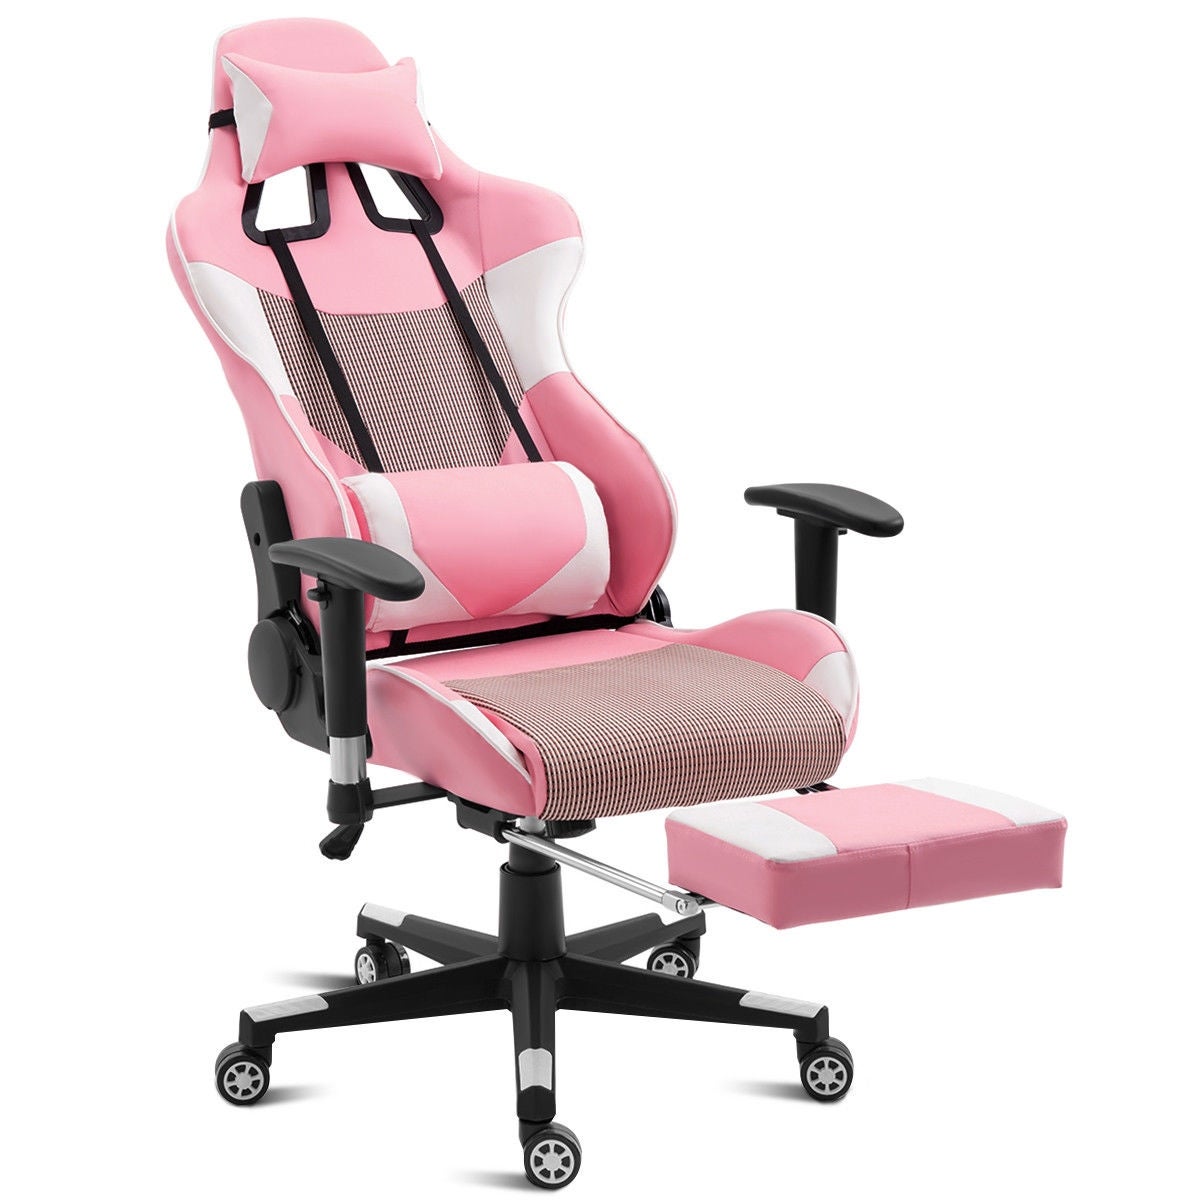 Best Gaming Chair Black Friday 2019 Deals | Feature | Prima Games